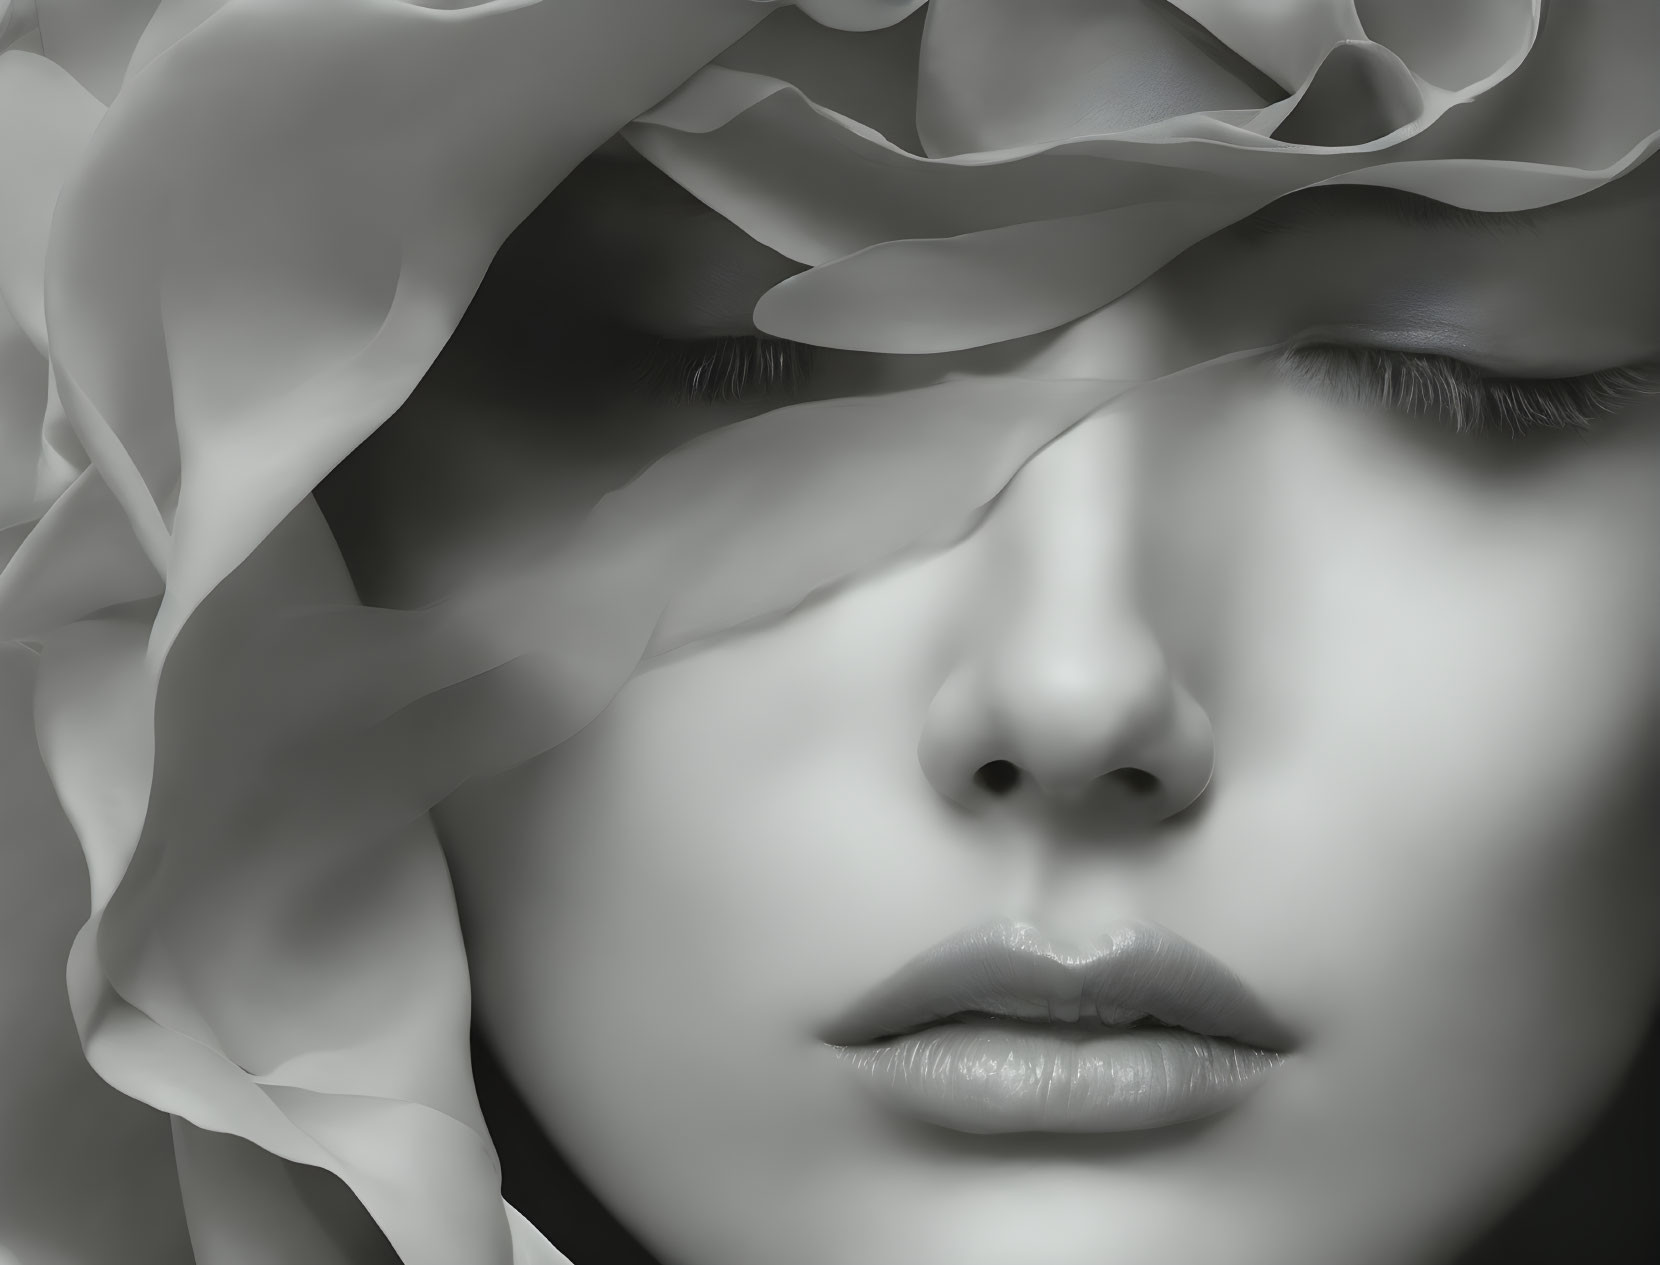 Person's face covered by flowing fabric, closed eyes and lips.